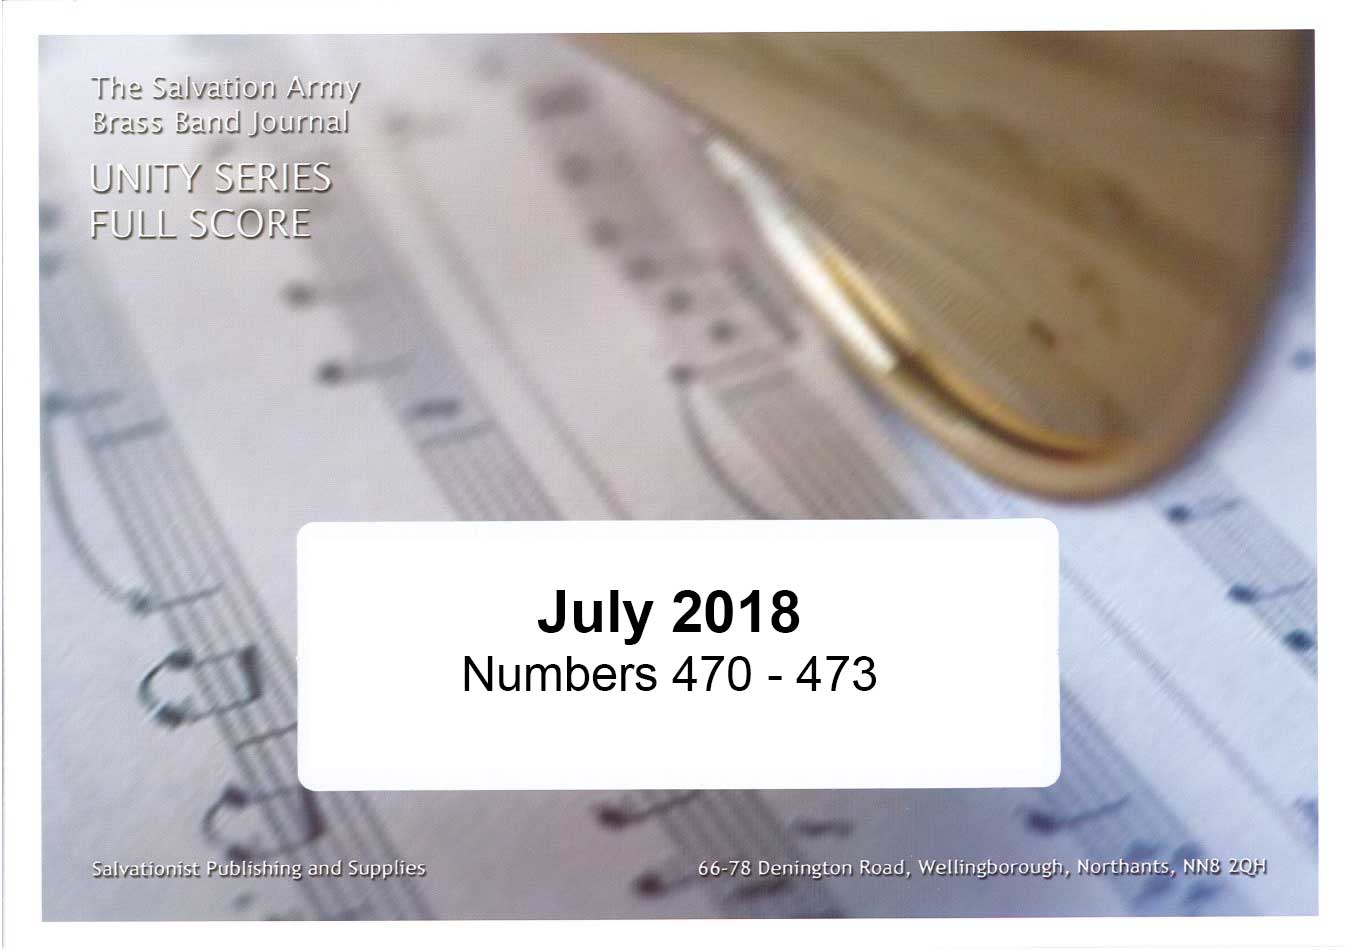 Unity Series Band Journal July 2018 - Numbers 470-473